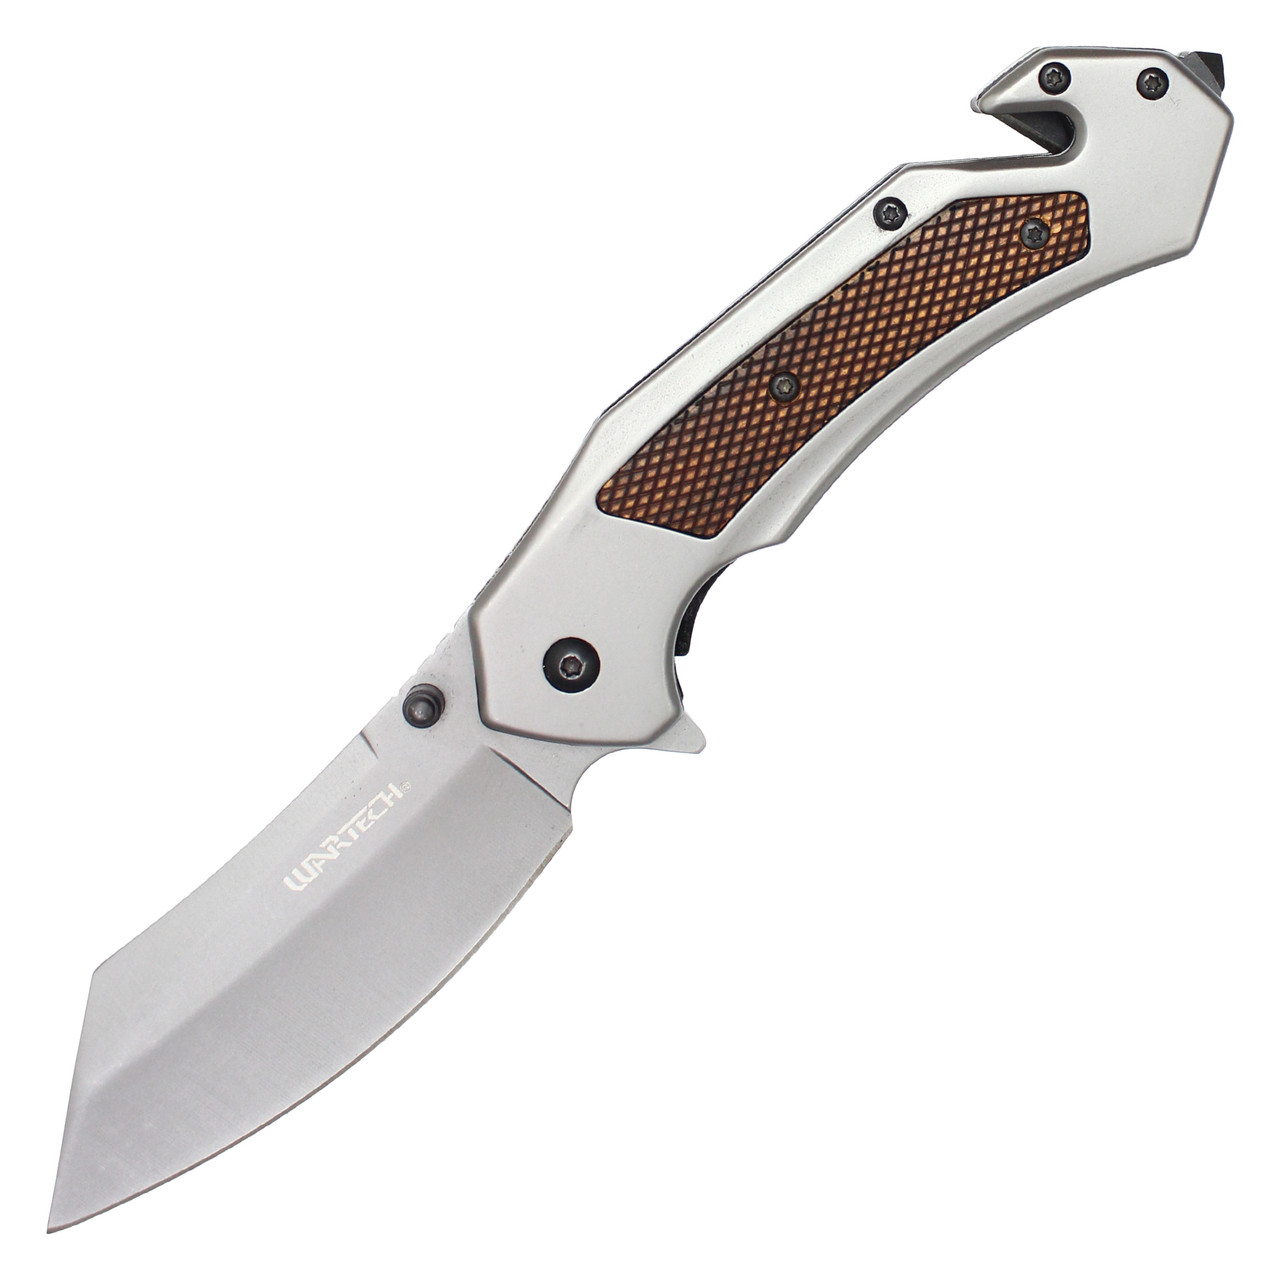 5" Closed Assisted Open Pocket Knife Stainless Steel Handle - Silver